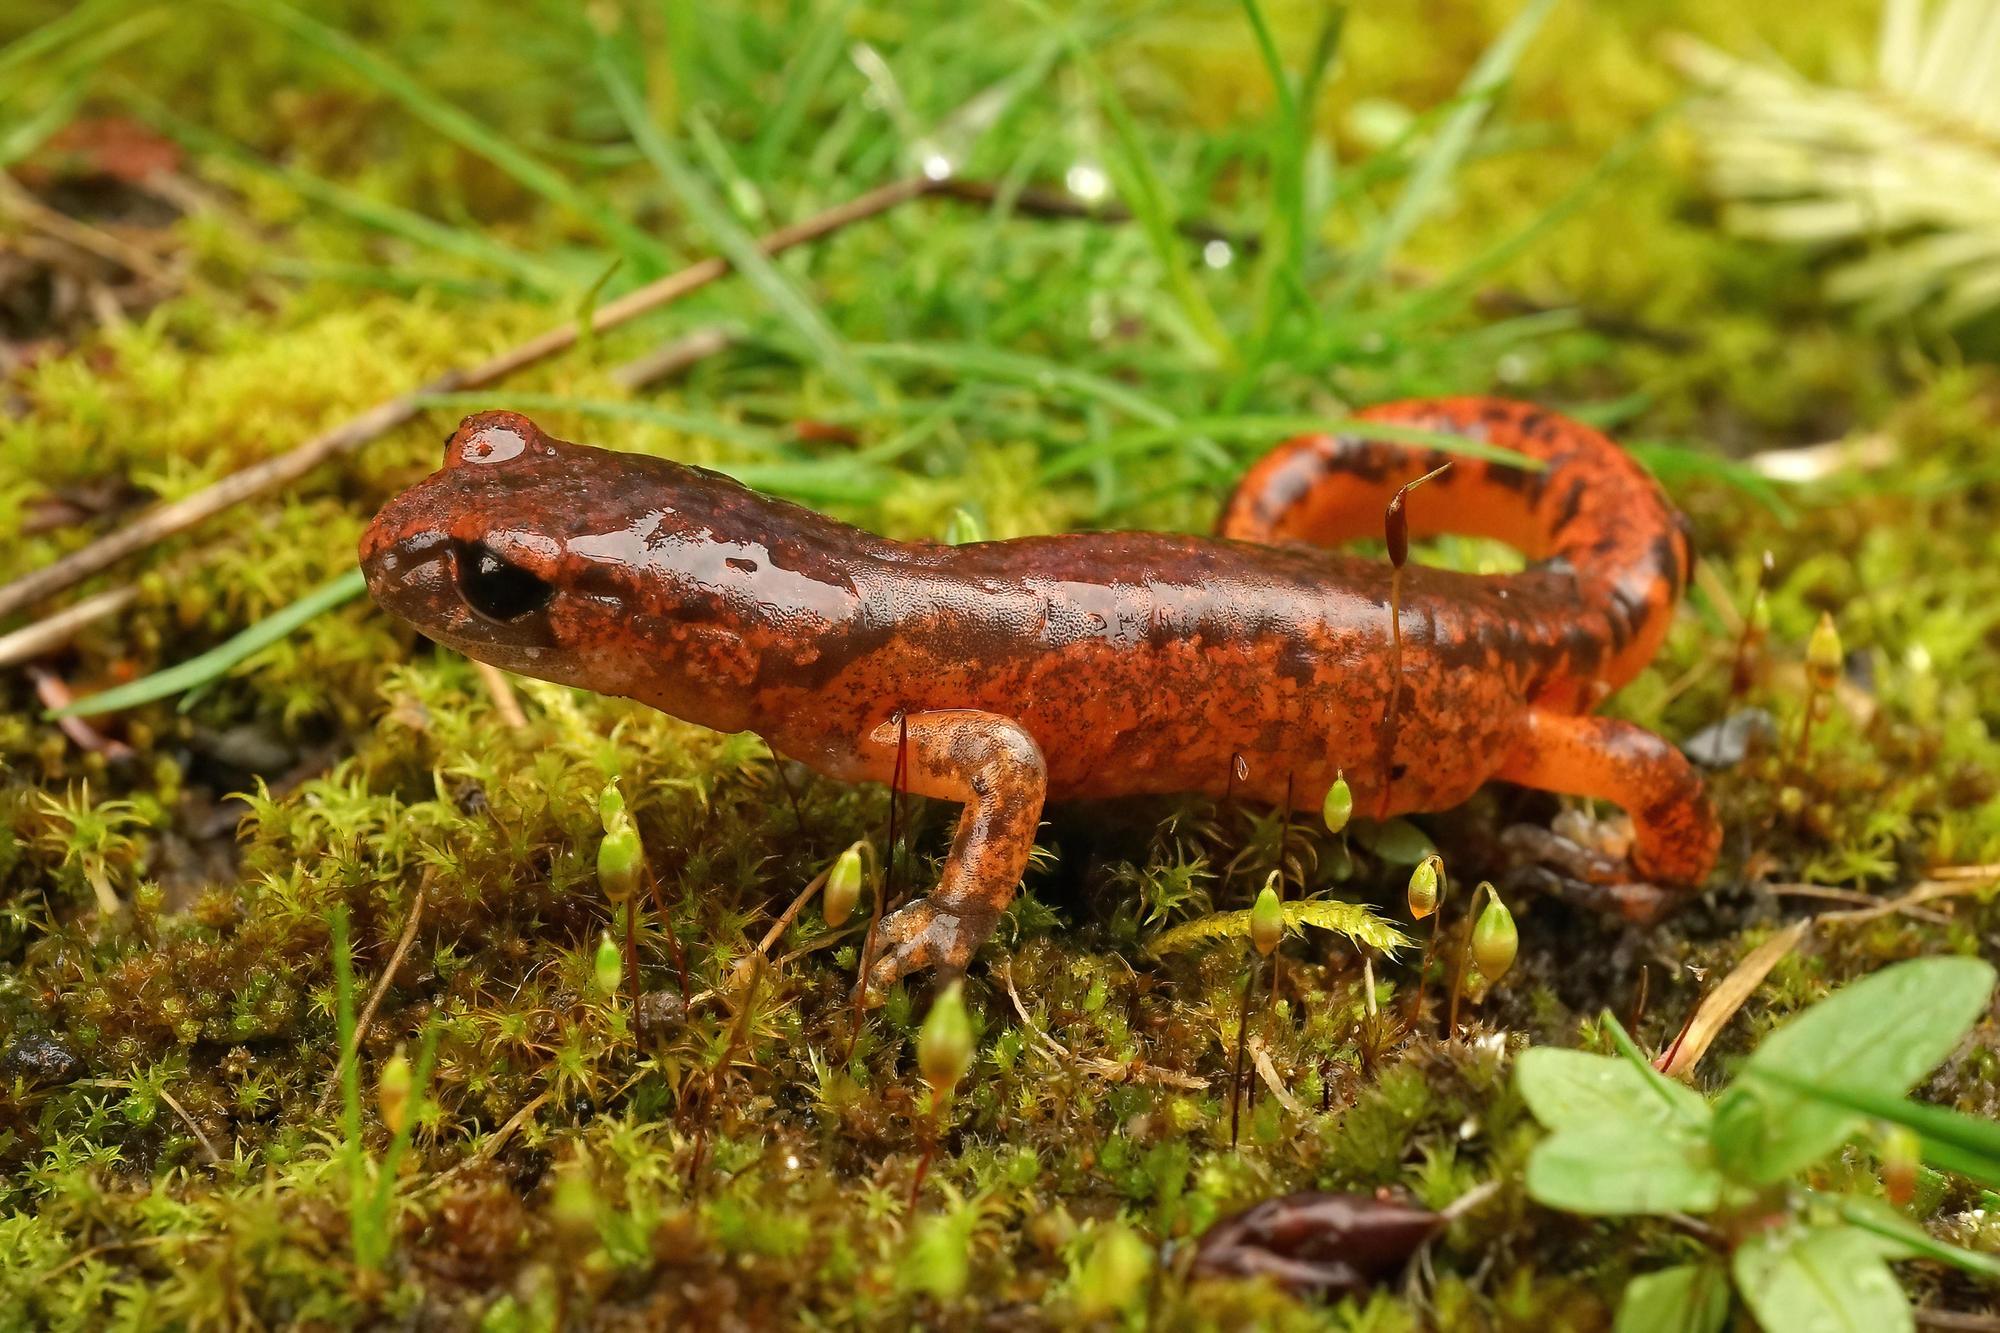 An orange newt found and photographed in Eugene, Oregon.